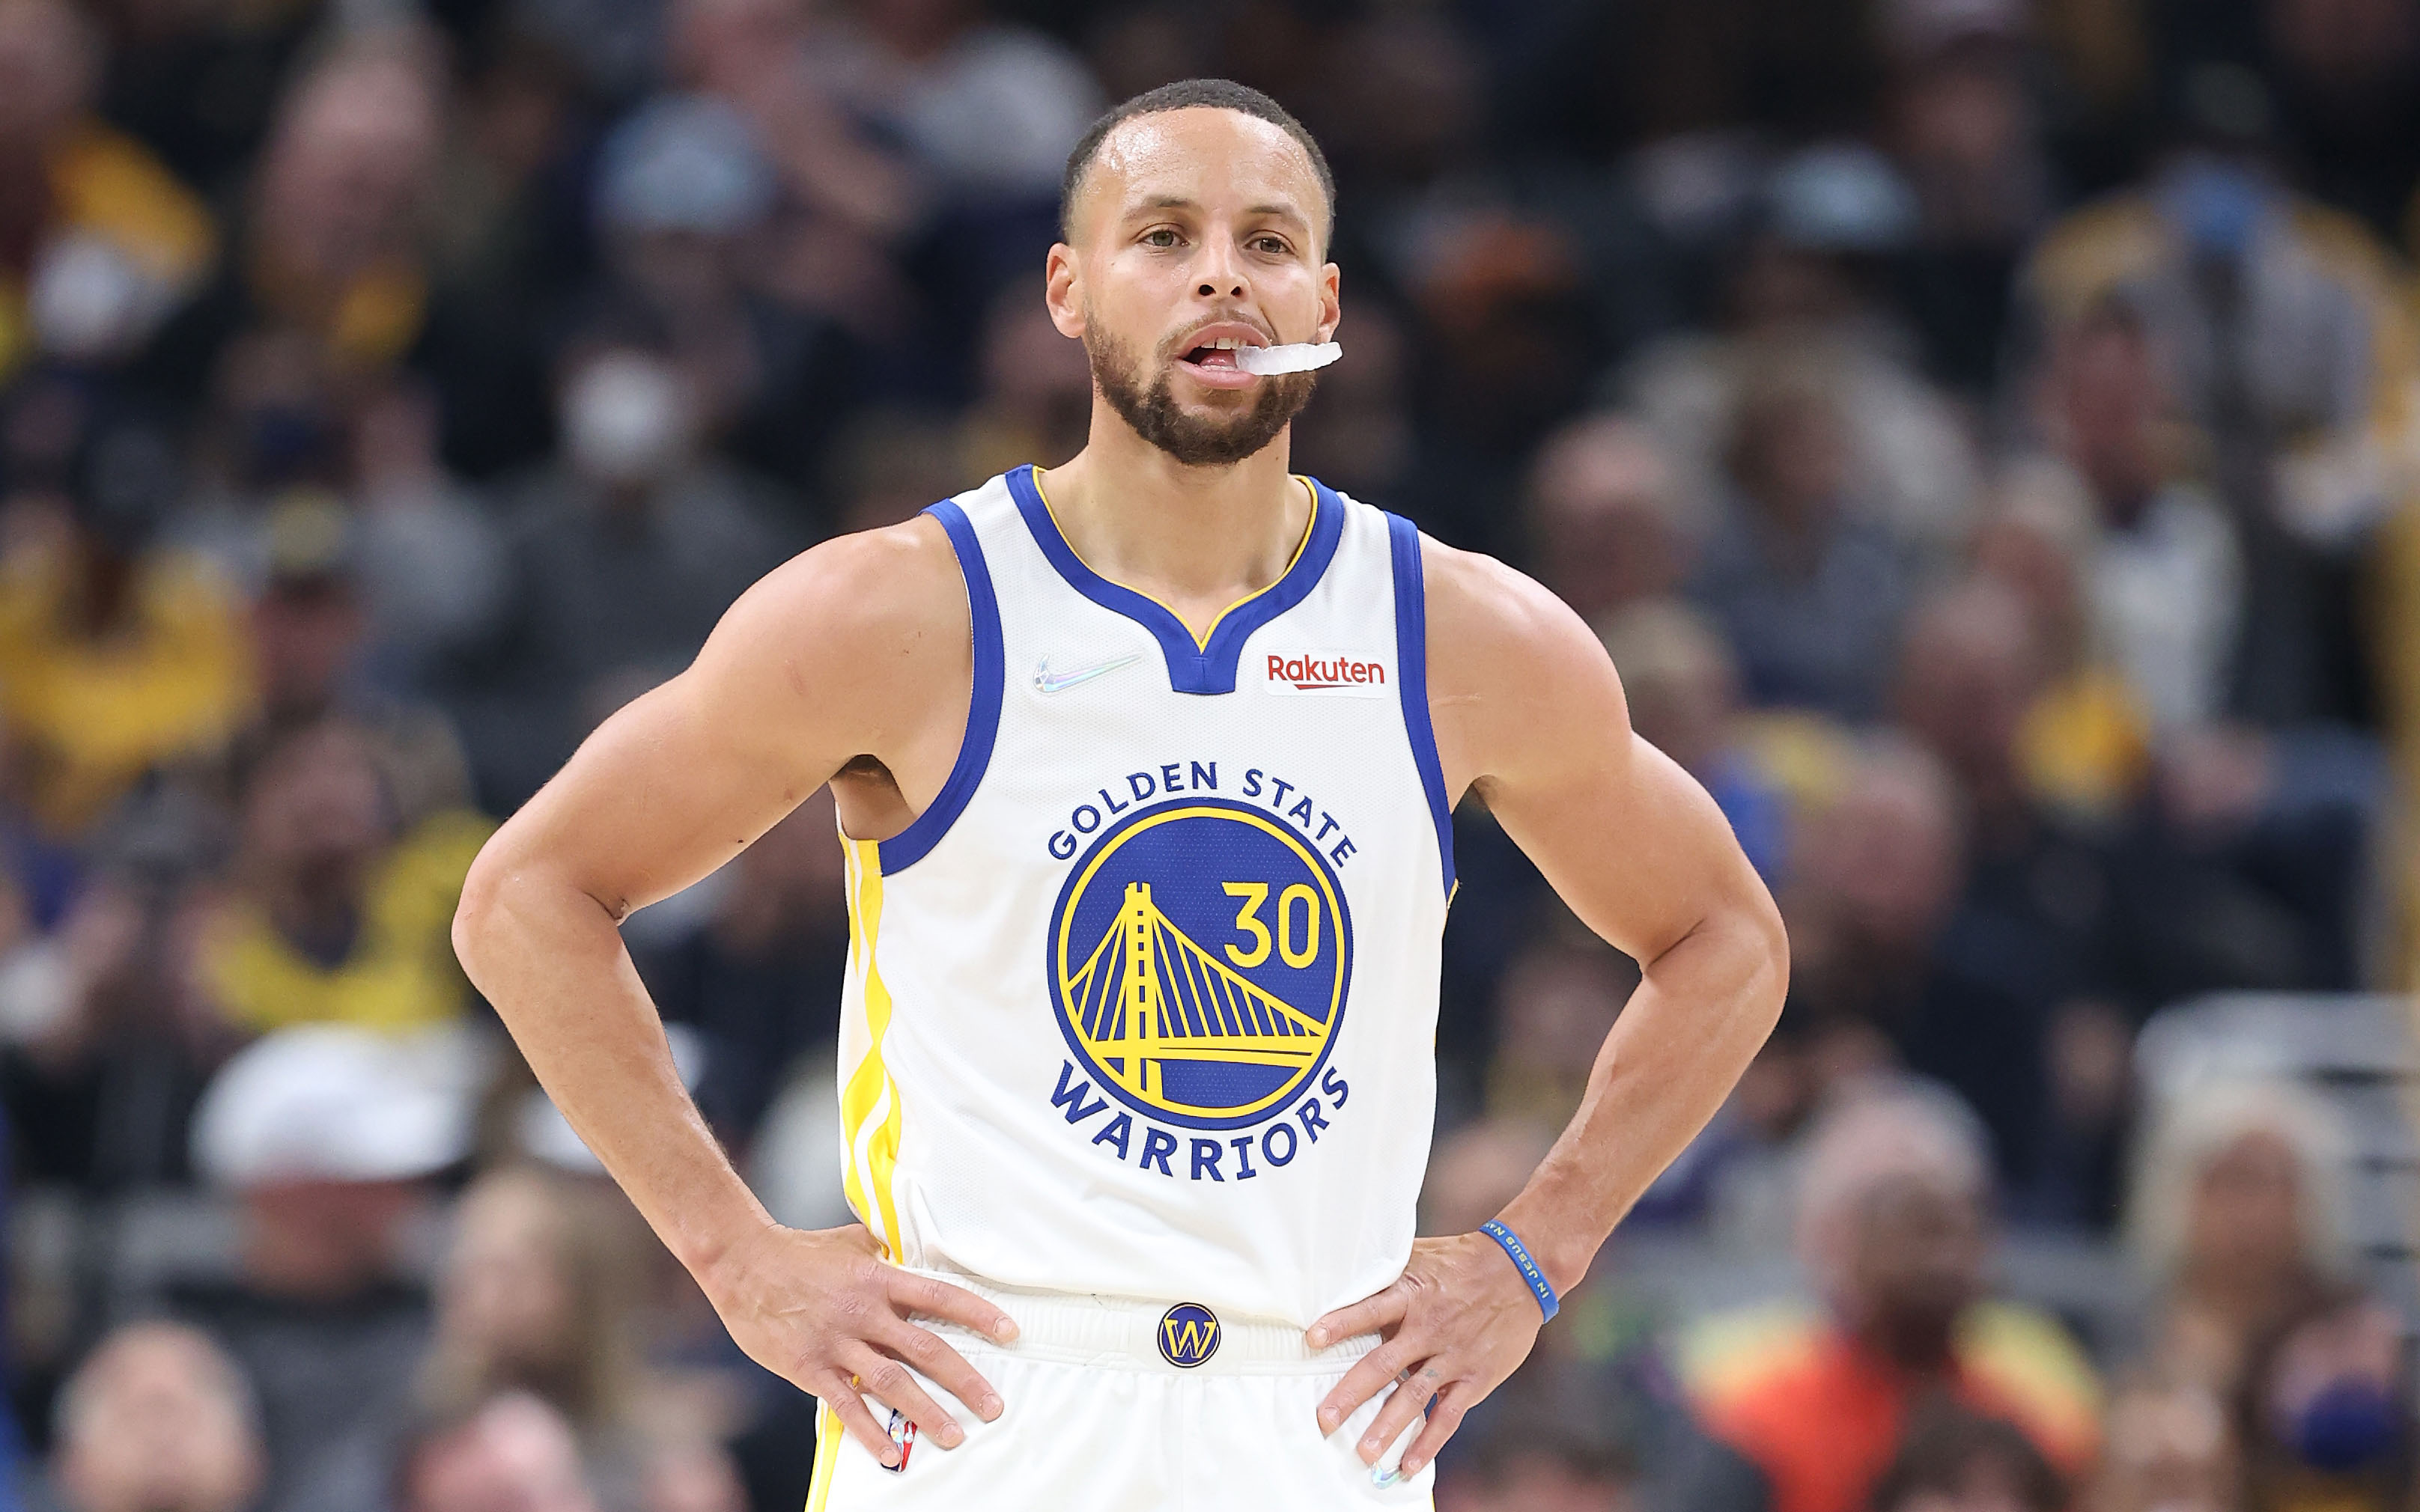 Watch: Steph Curry breaks Ray Allen's NBA 3-pointer record vs. Knicks